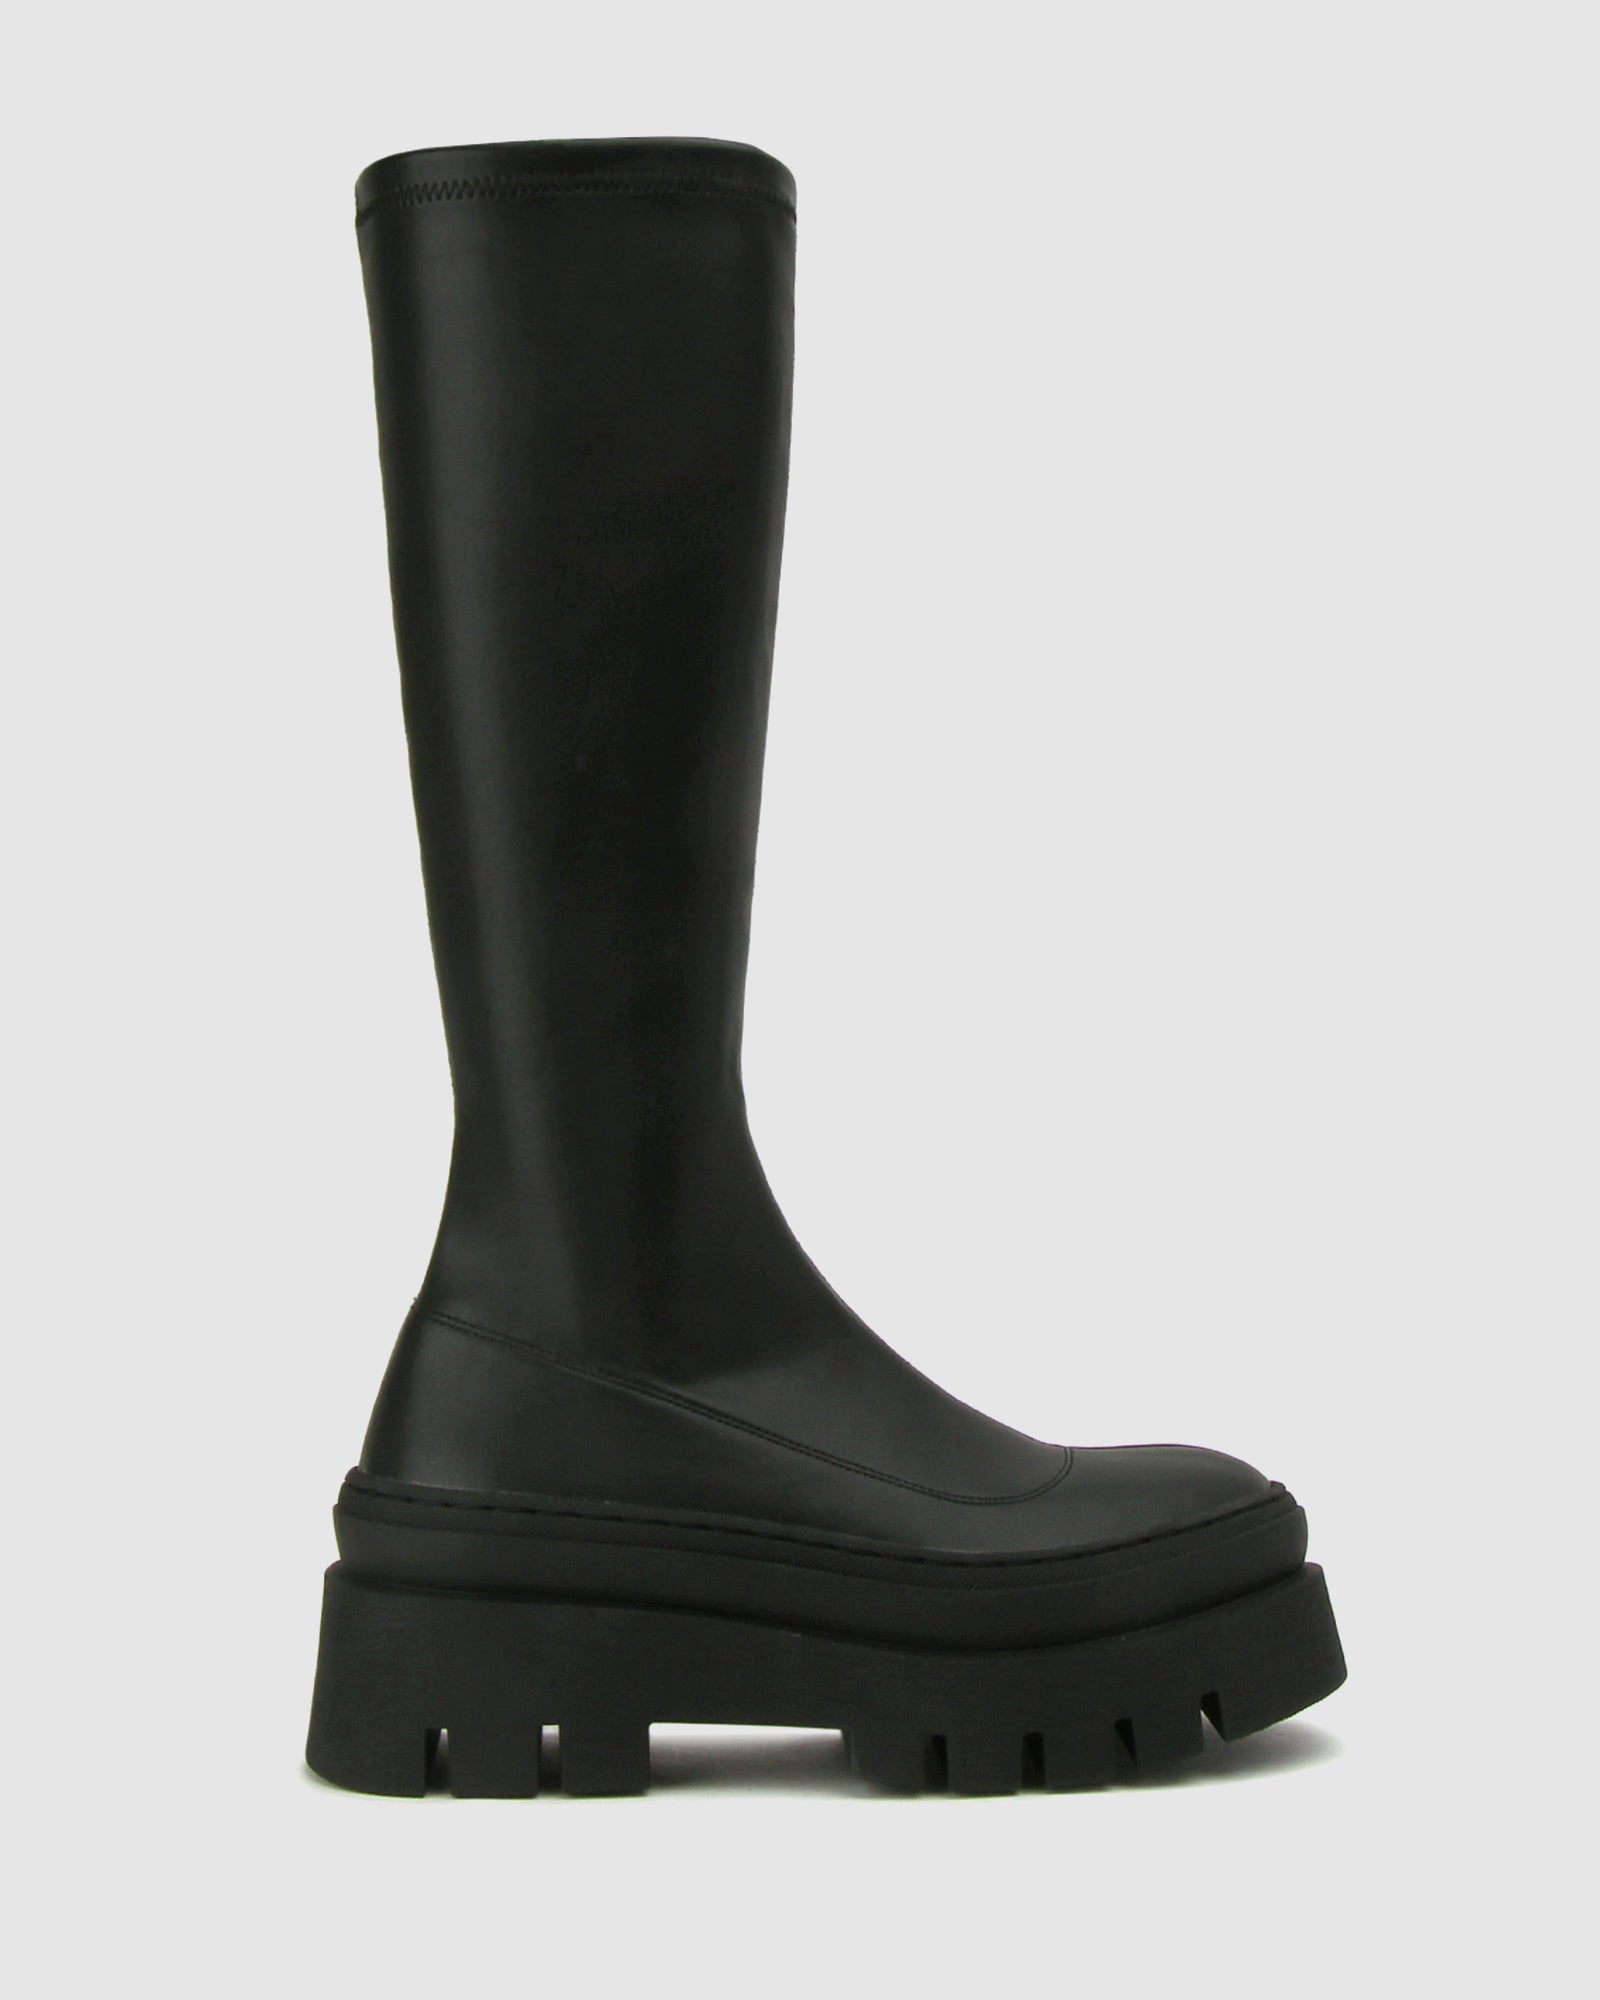 Buy TRAX Knee High Chunky Boots by Betts online - Betts